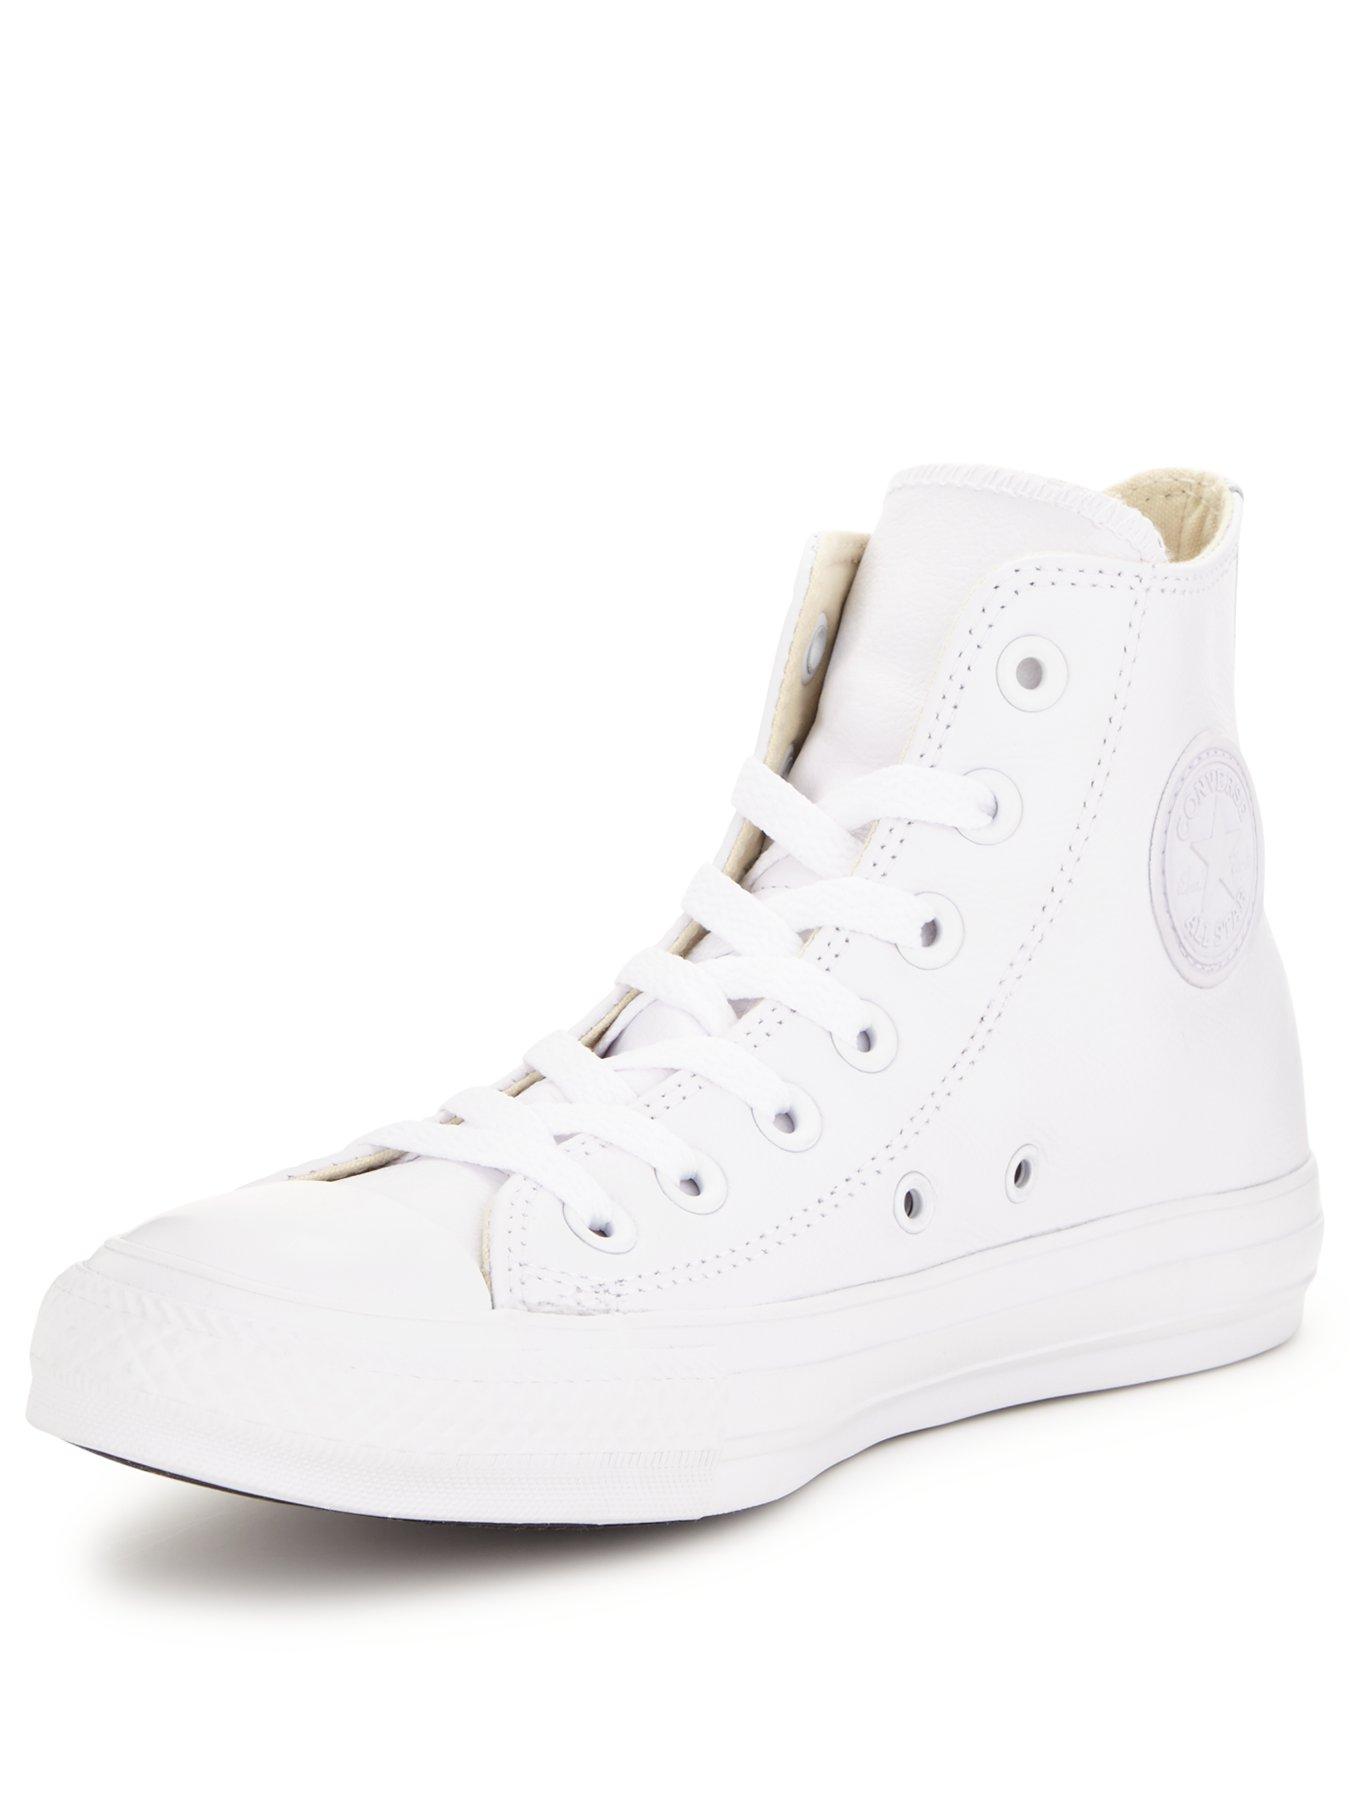 chuck taylor all star leather high top